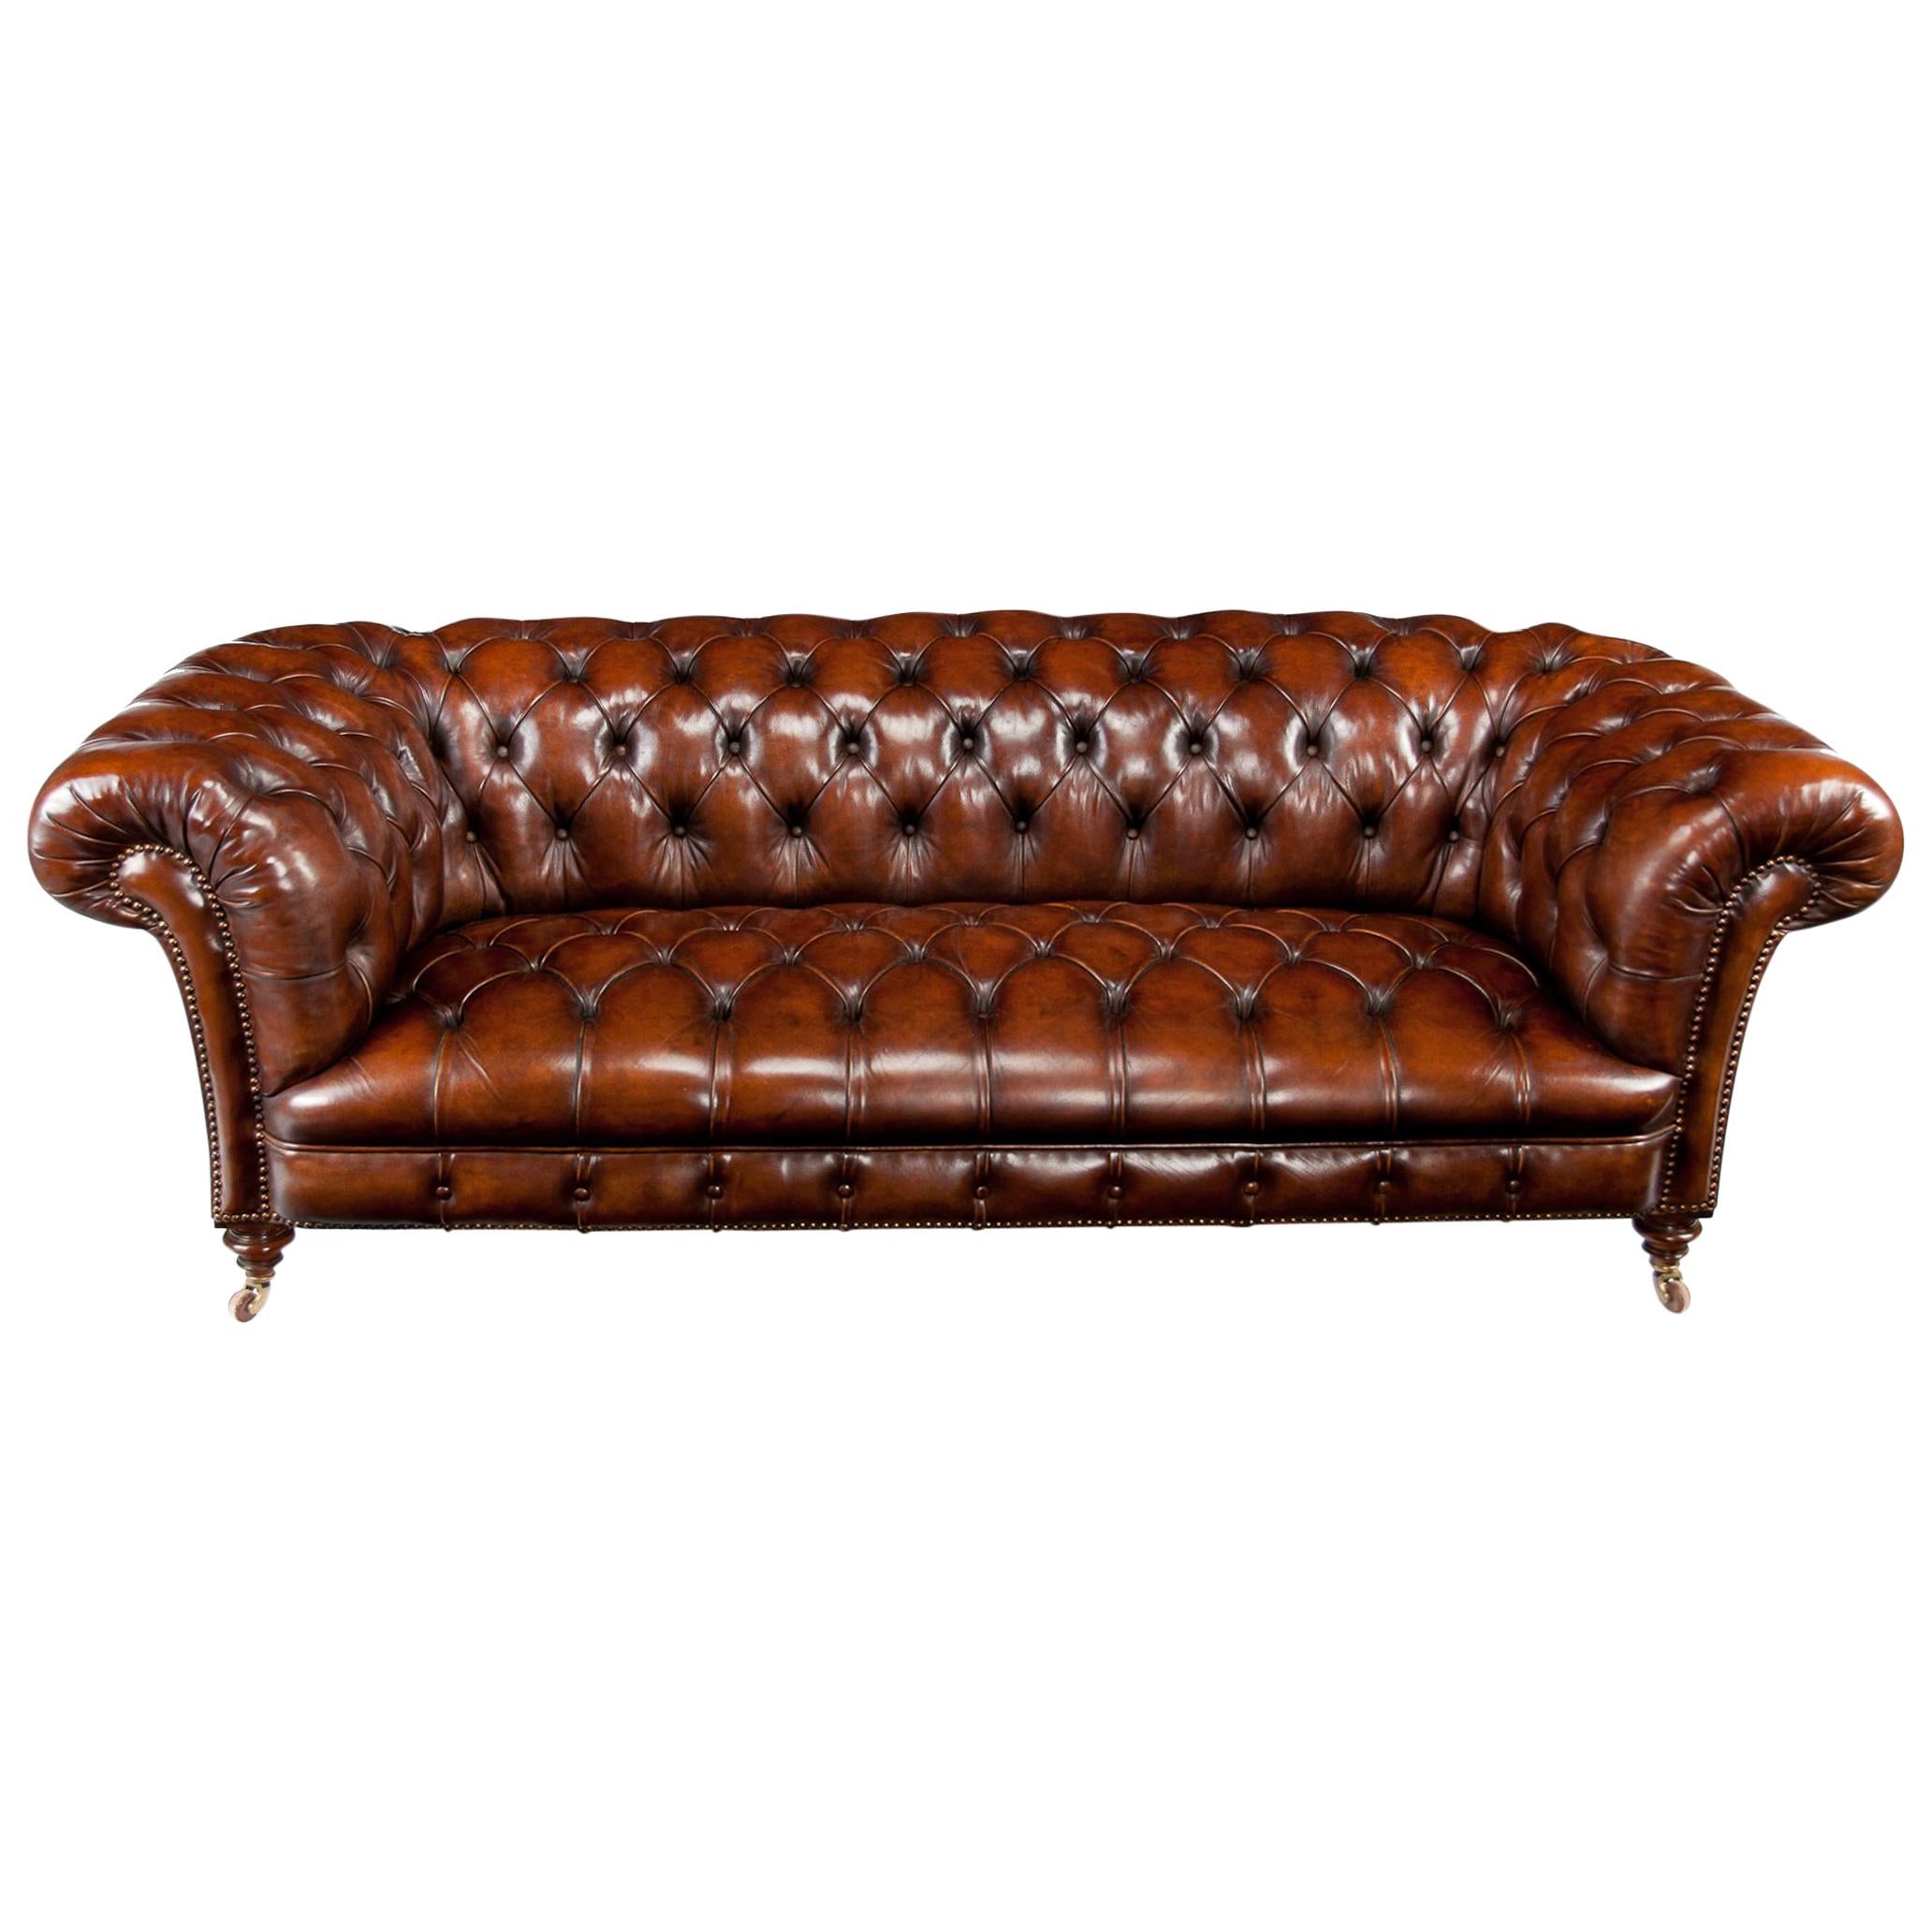 Wonderful 19th Century Deep Buttoned Leather Chesterfield by James Shoolbred